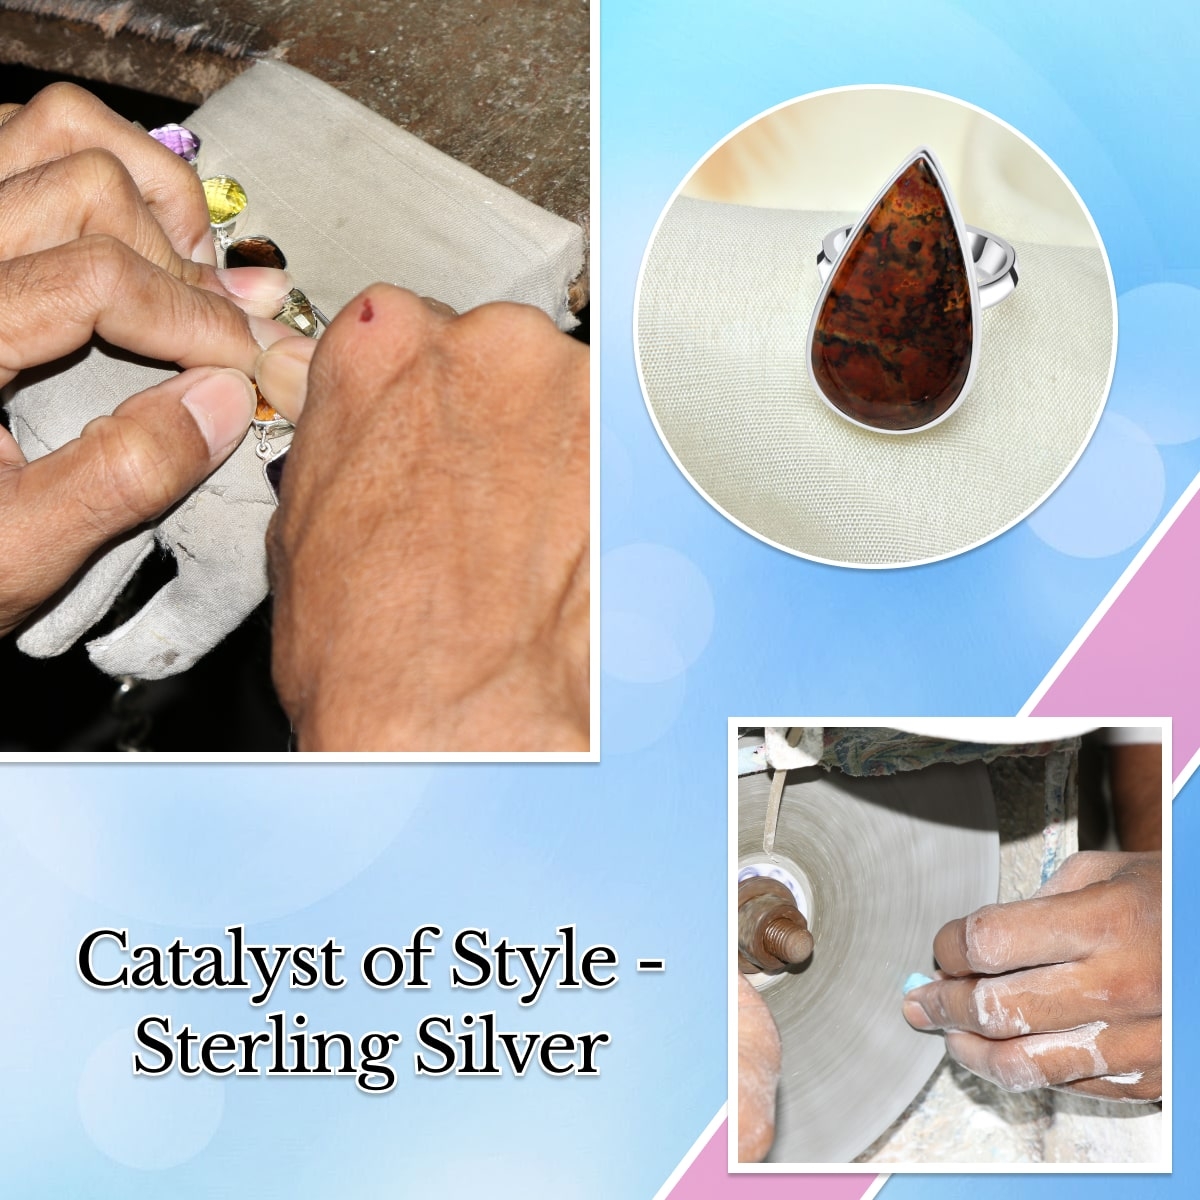 Sterling Silver's Catalytic Association